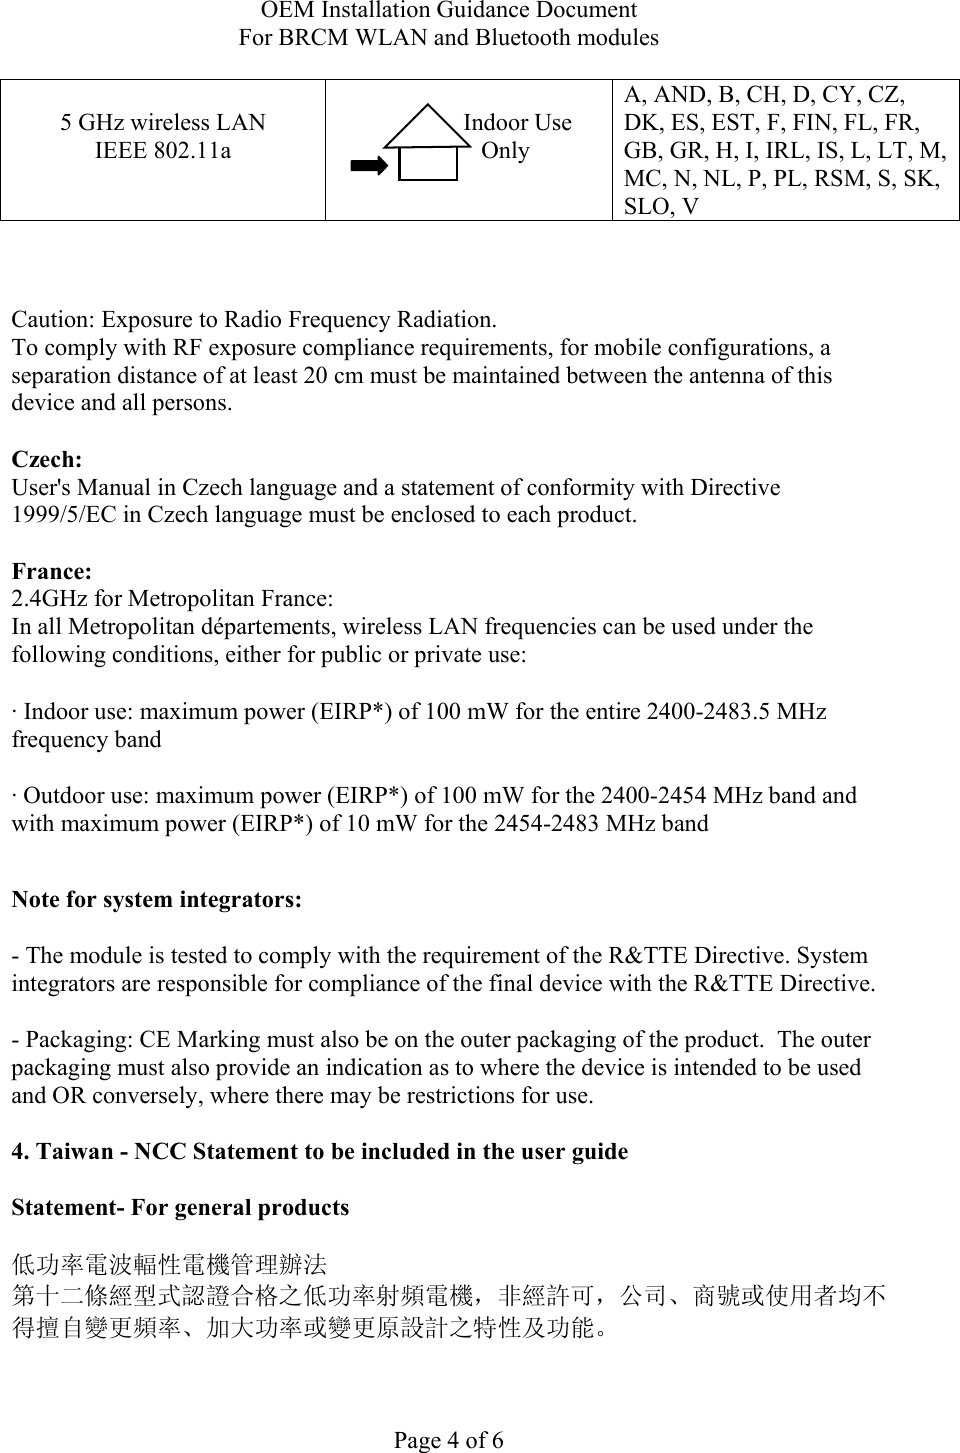 OEM Installation Guidance Document For BRCM WLAN and Bluetooth modules  Page 4 of 6  5 GHz wireless LAN IEEE 802.11a                  Indoor Use             Only  A, AND, B, CH, D, CY, CZ, DK, ES, EST, F, FIN, FL, FR, GB, GR, H, I, IRL, IS, L, LT, M, MC, N, NL, P, PL, RSM, S, SK, SLO, V    Caution: Exposure to Radio Frequency Radiation.   To comply with RF exposure compliance requirements, for mobile configurations, a separation distance of at least 20 cm must be maintained between the antenna of this device and all persons.  Czech:  User&apos;s Manual in Czech language and a statement of conformity with Directive 1999/5/EC in Czech language must be enclosed to each product.   France: 2.4GHz for Metropolitan France:   In all Metropolitan départements, wireless LAN frequencies can be used under the following conditions, either for public or private use:  · Indoor use: maximum power (EIRP*) of 100 mW for the entire 2400-2483.5 MHz frequency band · Outdoor use: maximum power (EIRP*) of 100 mW for the 2400-2454 MHz band and with maximum power (EIRP*) of 10 mW for the 2454-2483 MHz band  Note for system integrators:   - The module is tested to comply with the requirement of the R&amp;TTE Directive. System integrators are responsible for compliance of the final device with the R&amp;TTE Directive.   - Packaging: CE Marking must also be on the outer packaging of the product.  The outer packaging must also provide an indication as to where the device is intended to be used and OR conversely, where there may be restrictions for use.   4. Taiwan - NCC Statement to be included in the user guide  Statement- For general products  低功率電波輻性電機管理辦法 第十二條經型式認證合格之低功率射頻電機，非經許可，公司、商號或使用者均不得擅自變更頻率、加大功率或變更原設計之特性及功能。  